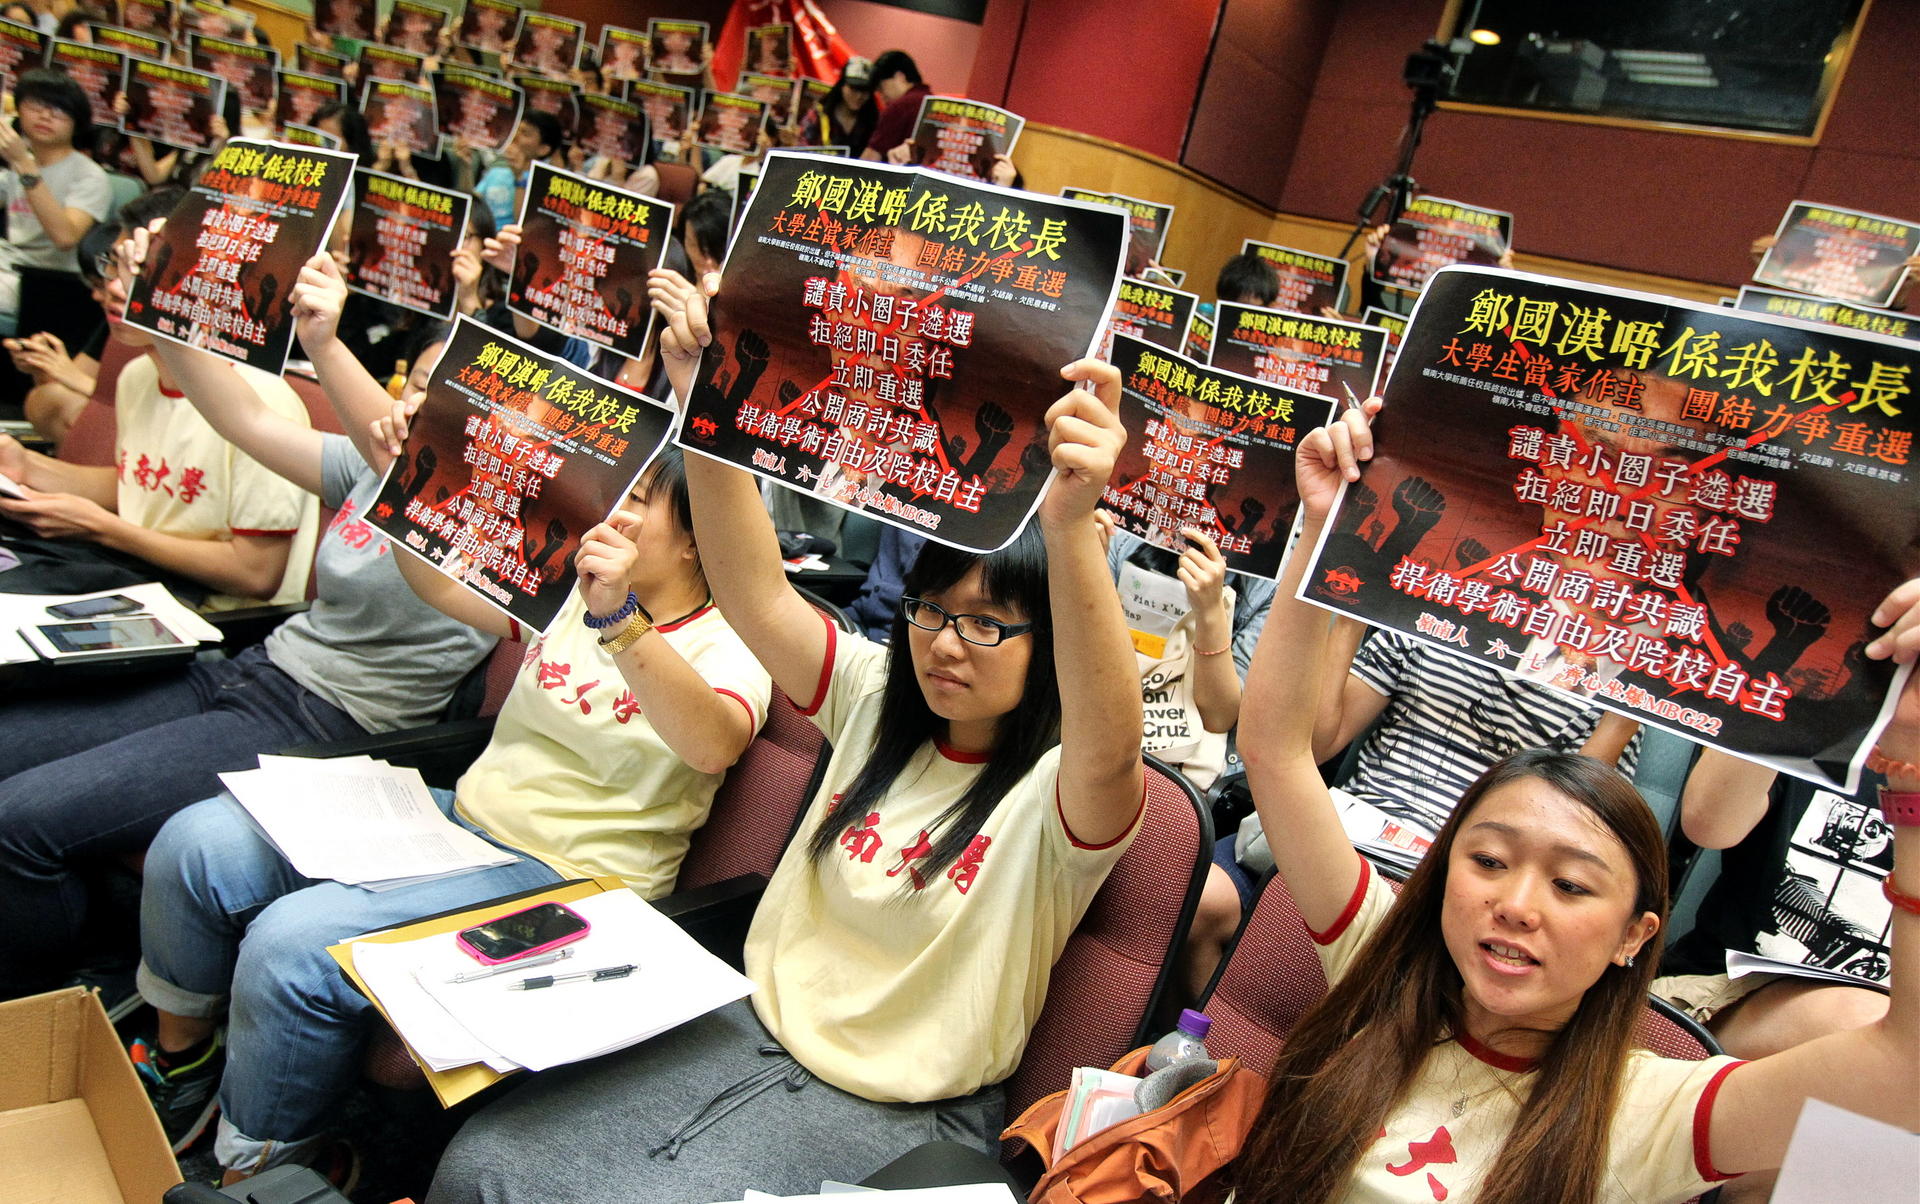 Students at Lingnan University in Tuen Mun objected to the appointment of Leonard Cheng as president. Photo: K.Y. Cheng